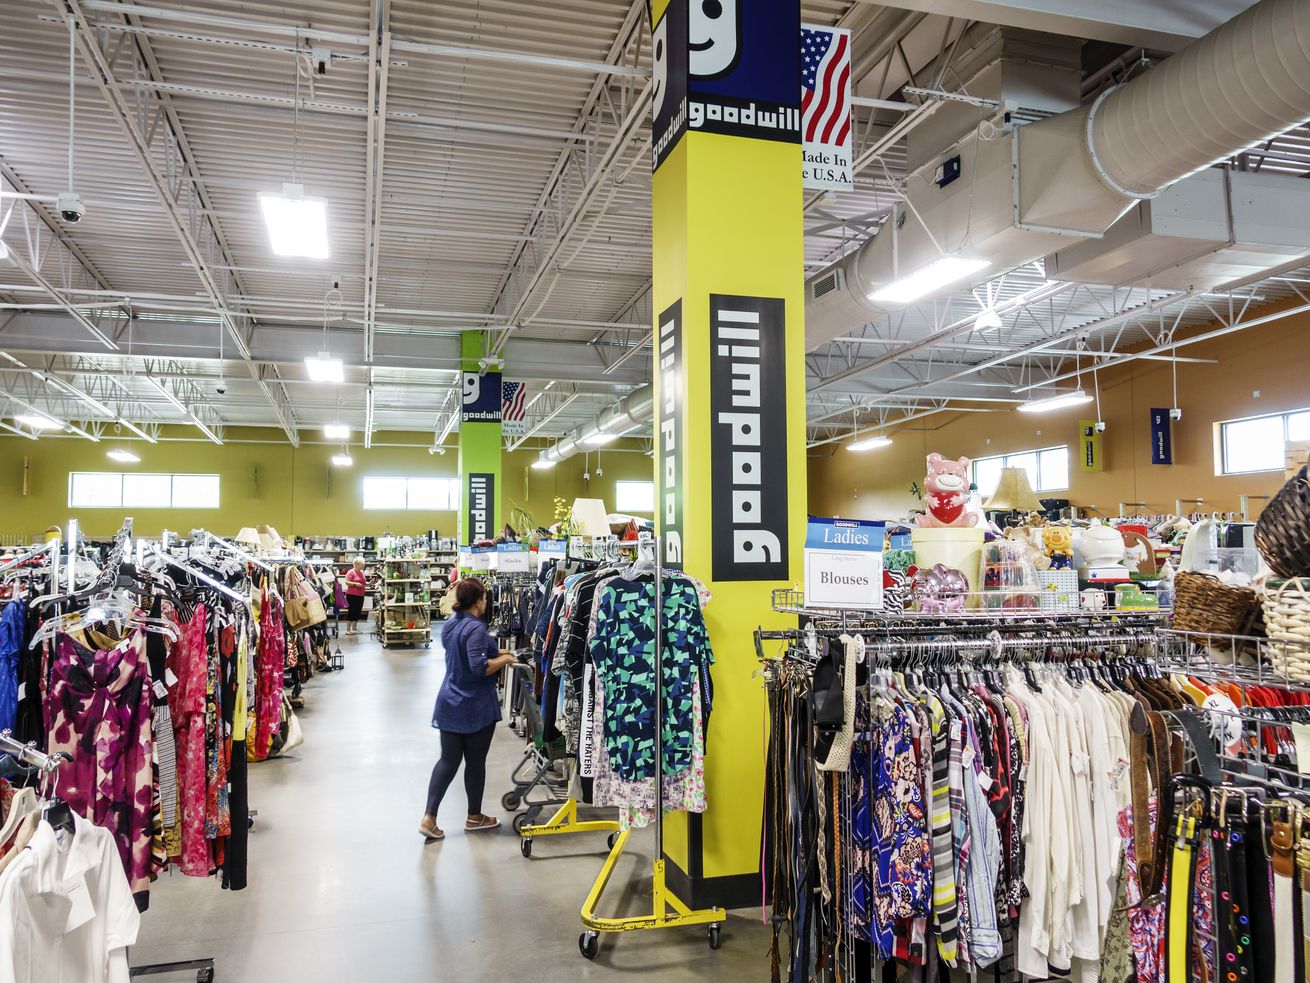 How thrifting became problematic